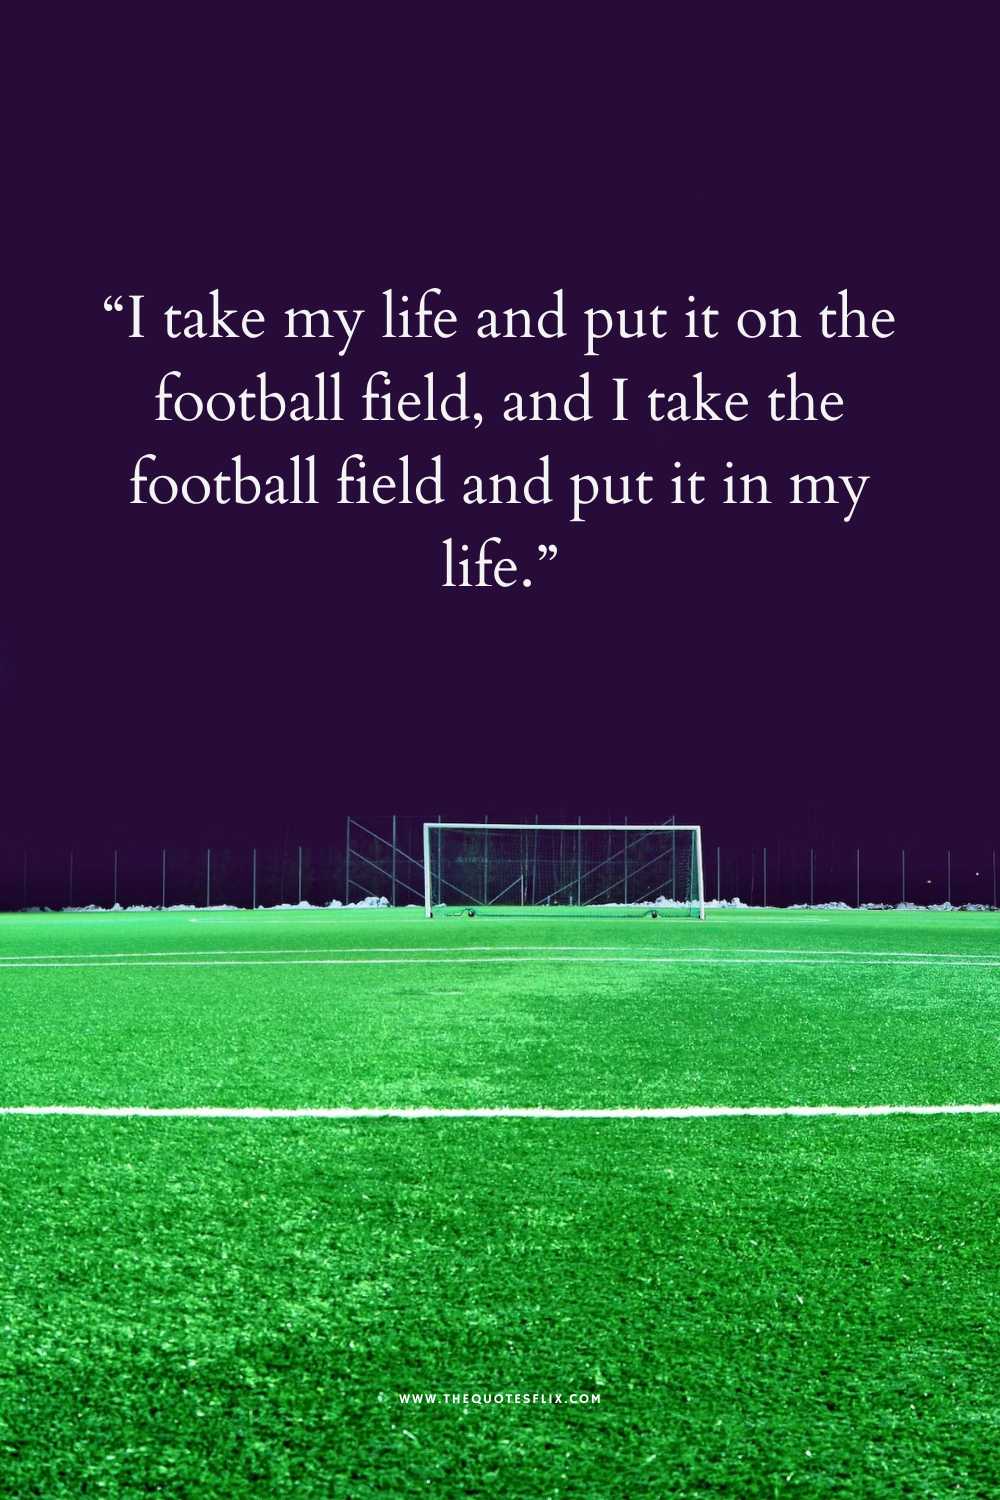 short football love quotes - i take my life put it in football field